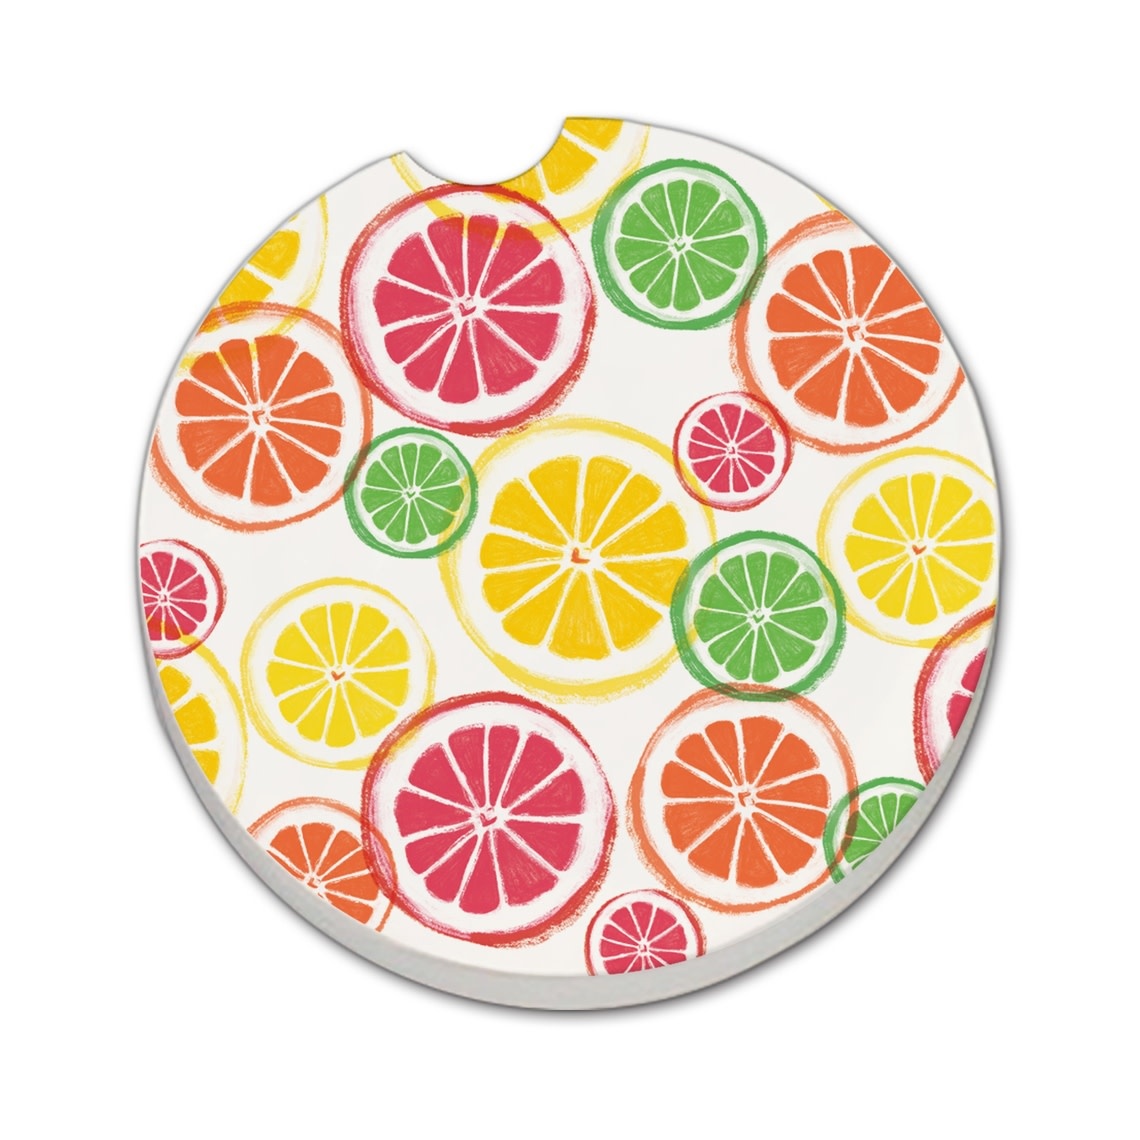 CounterArt and Highland Home "Slices of Summer" Stone Car Coaster